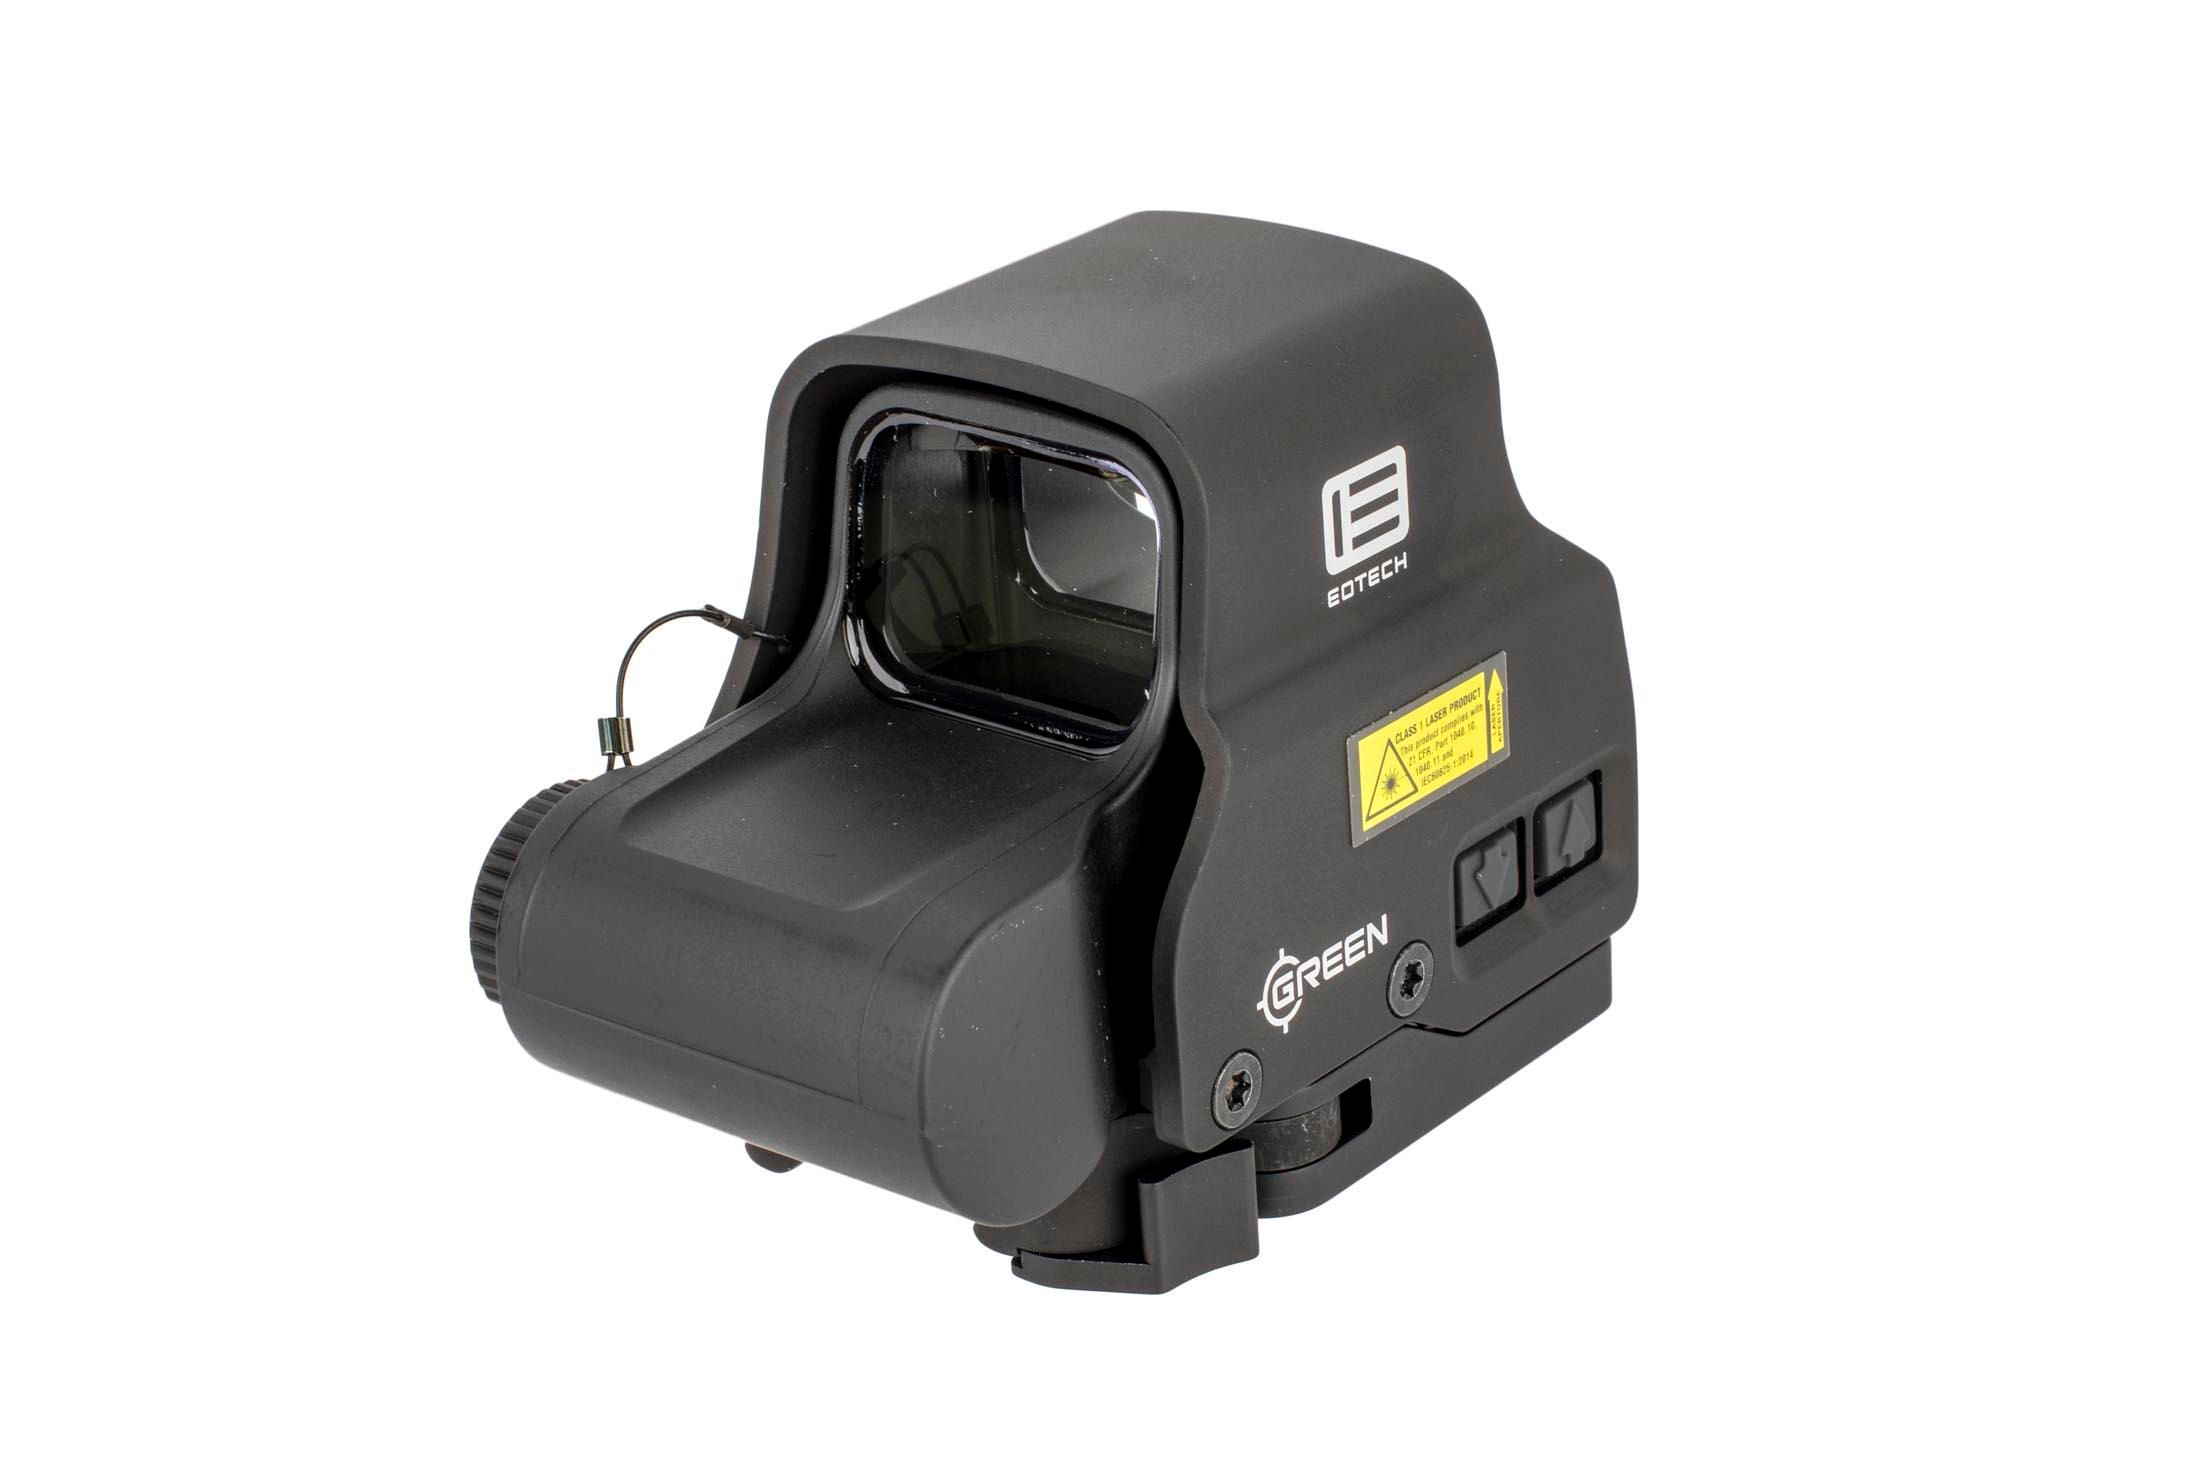 EOTECH EXPS2-0 Holographic Weapon Sight - Green Reticle